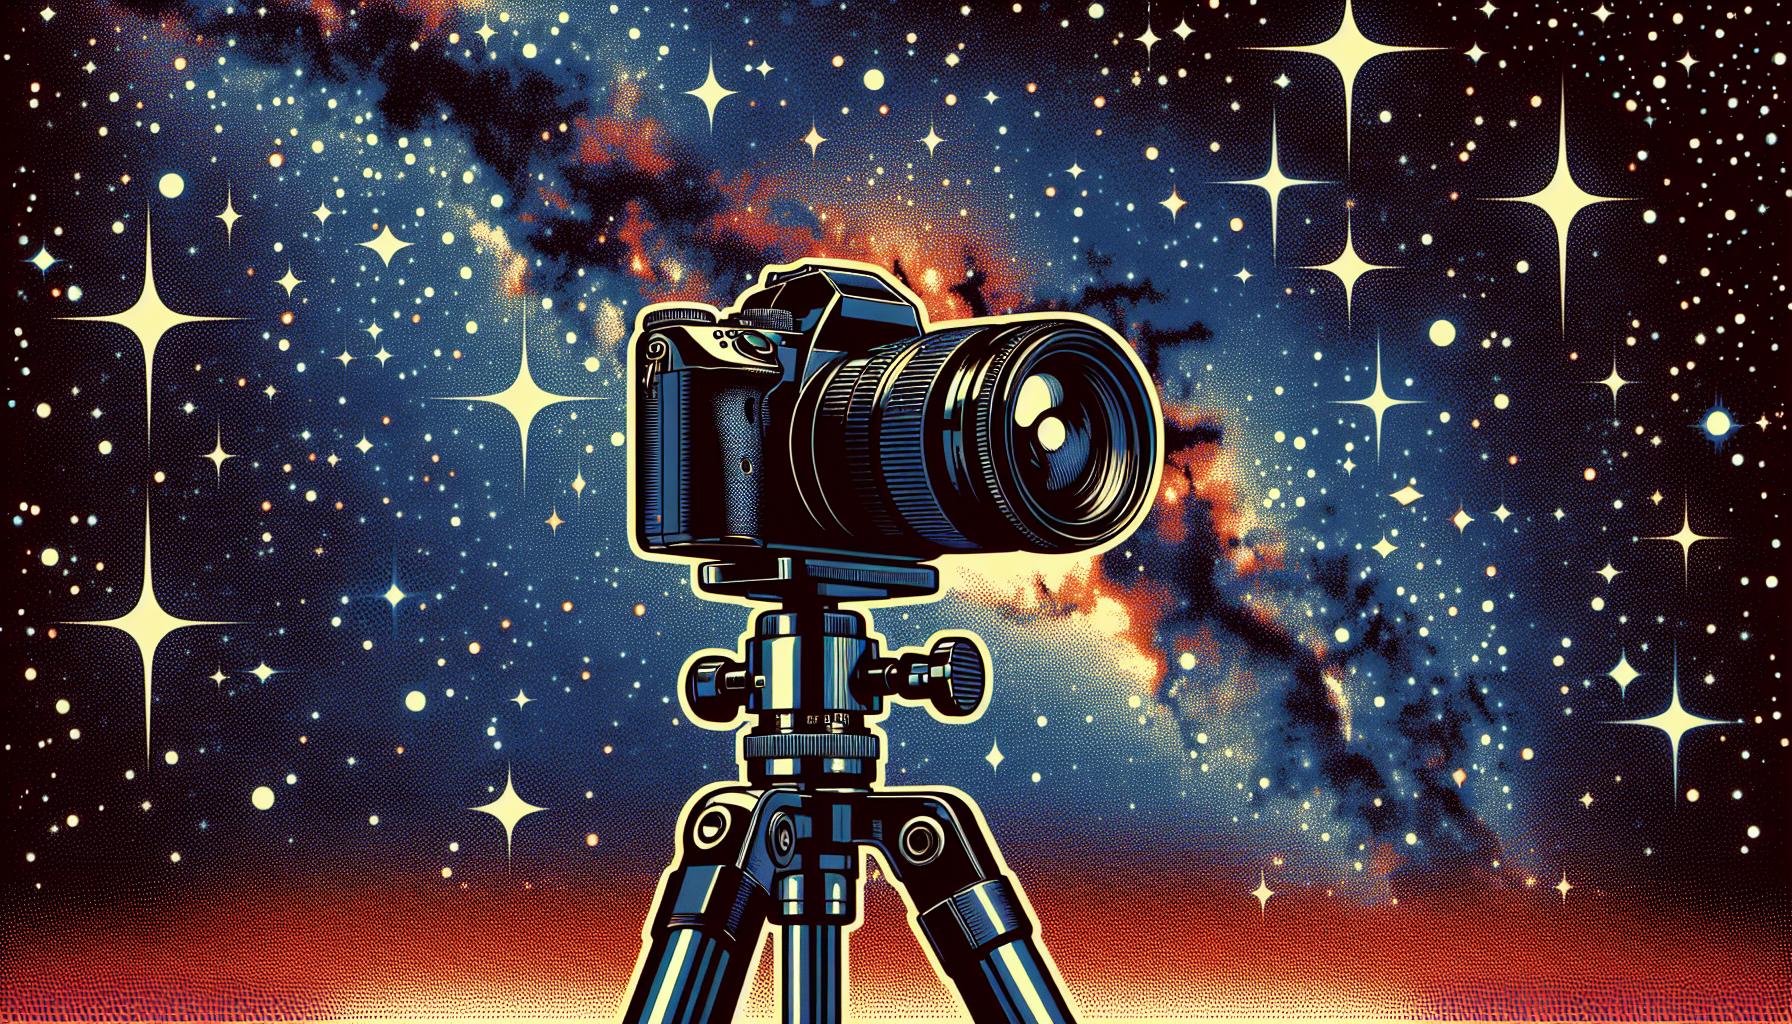 You are currently viewing Unlocking the Night Sky: A Guide to Canon R7 Astrophotography